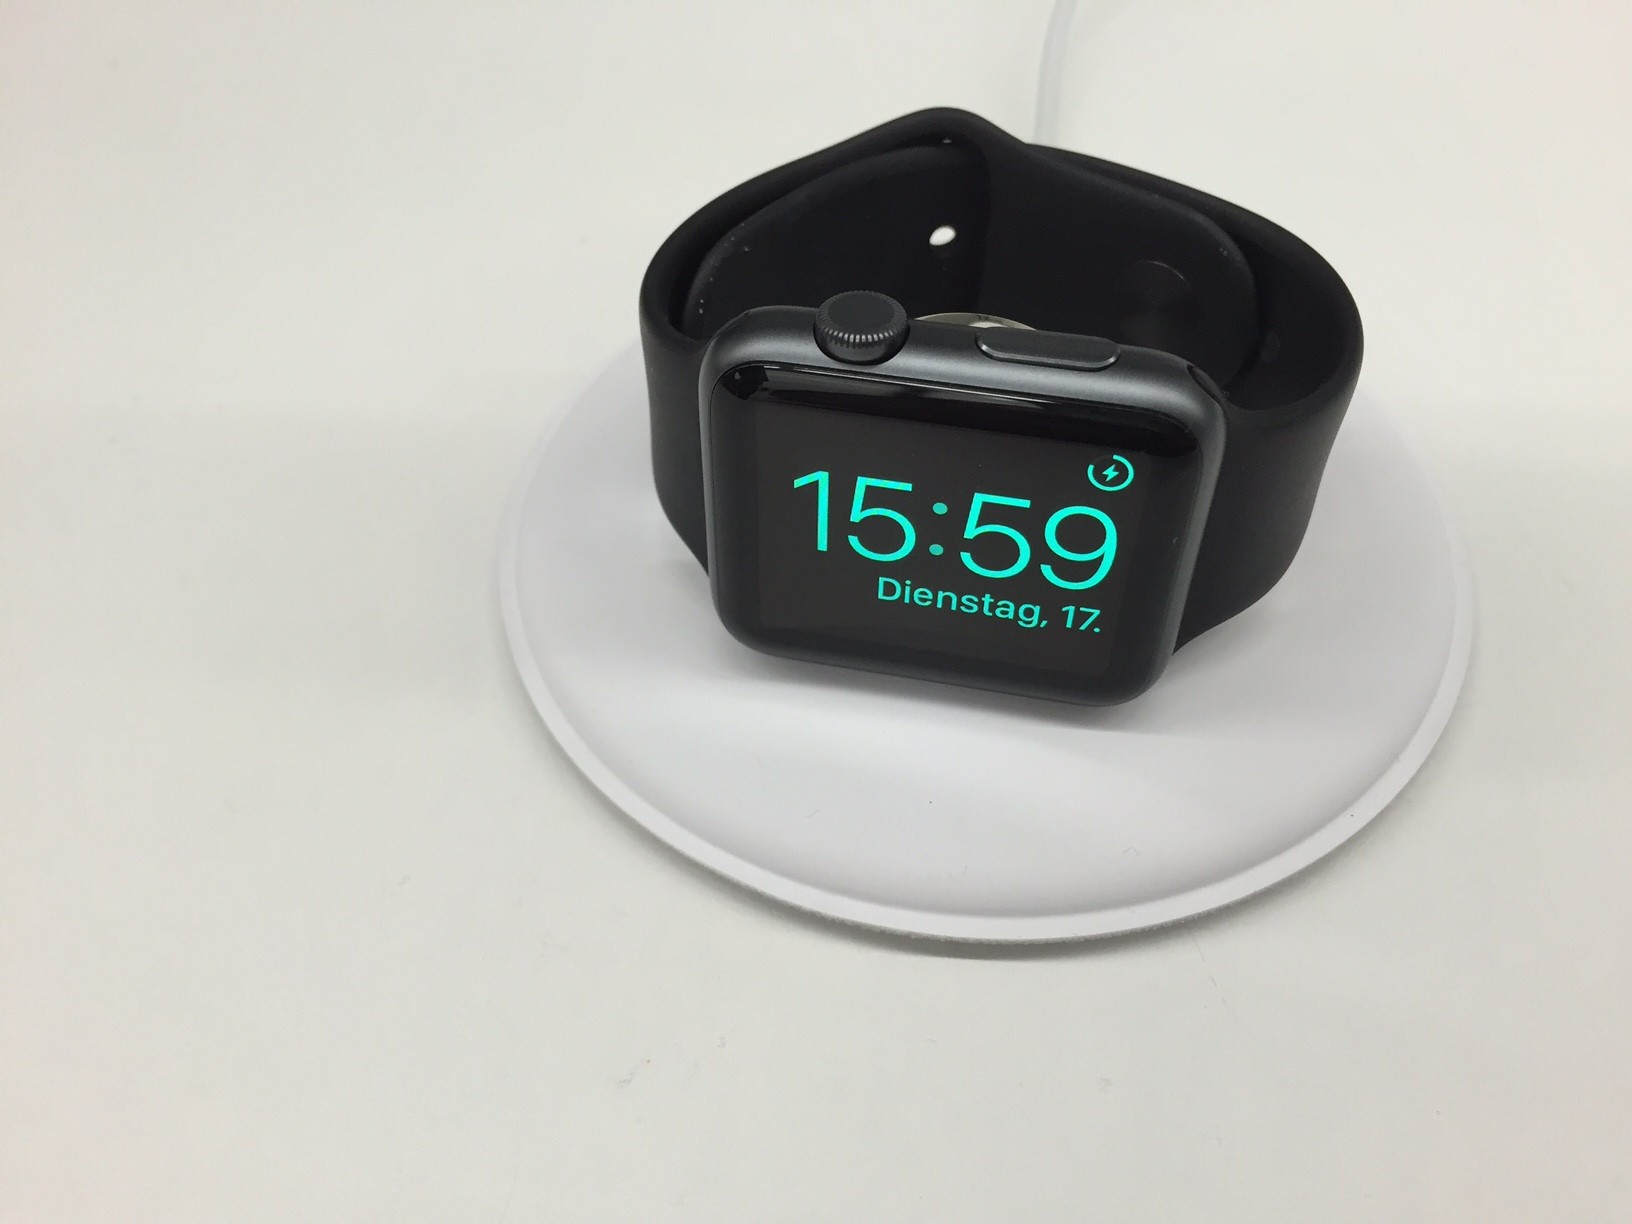 Official Apple Watch Charging Dock Shown in Leaked Photo